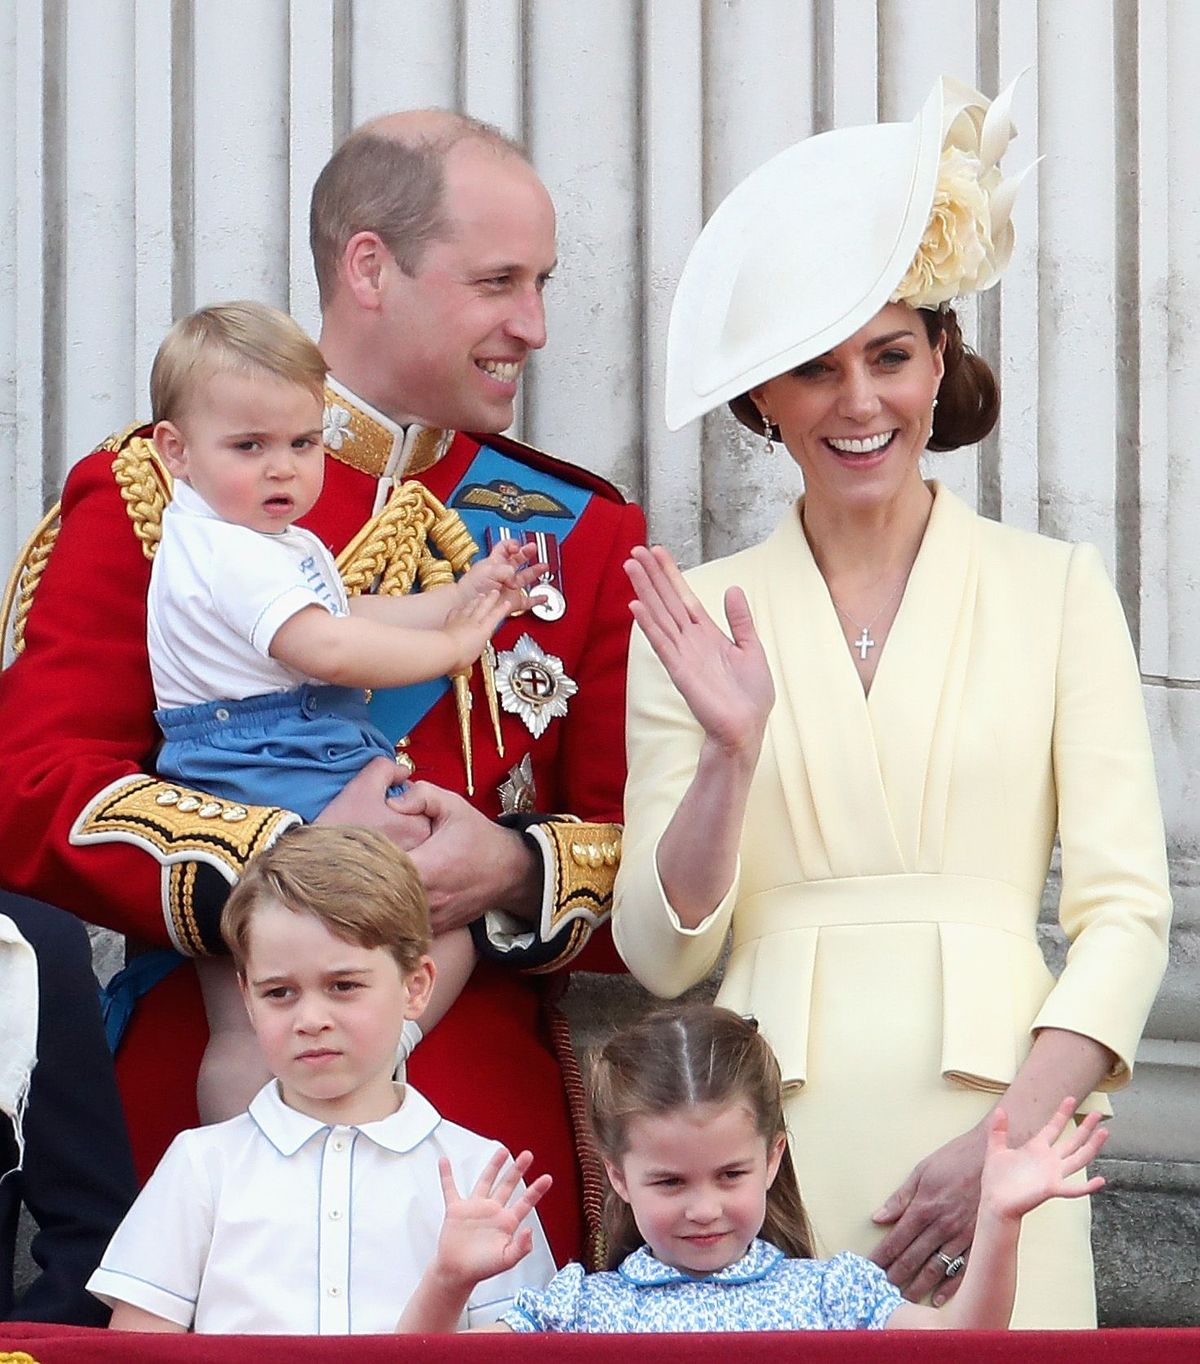 Prince William, Kate Middleton, Prince Louis, Prince George, and Princess Charlotte during Trooping The Colour on June 8, 2019 in London, England. | Photo: Getty Images